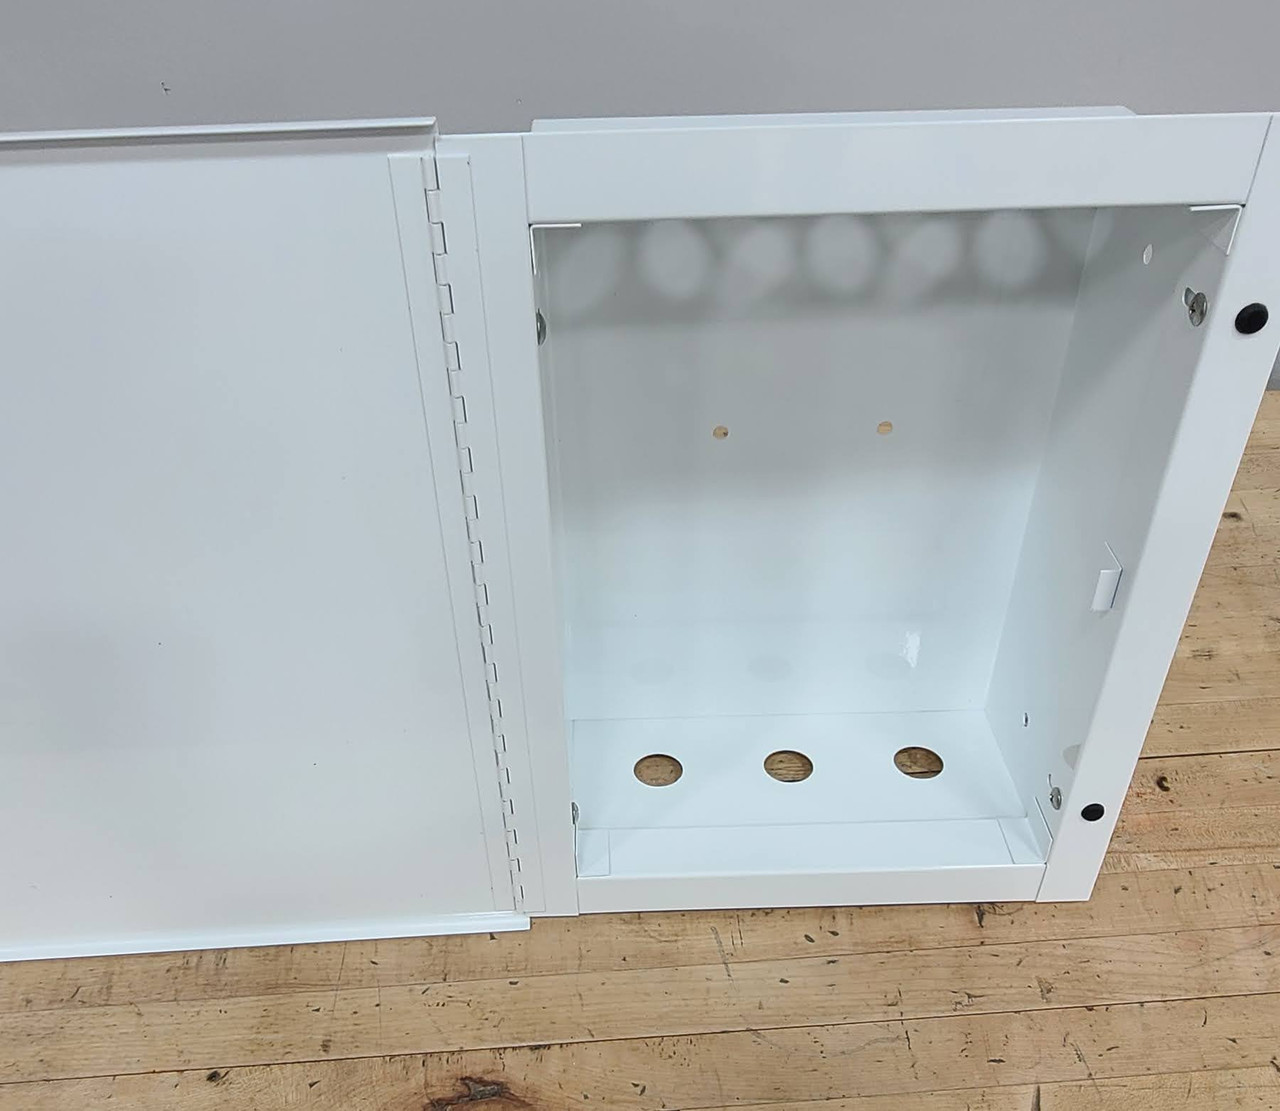 Multi-Purpose Industrial Lockable Cabinet 30 x 20 x 8 White Steel Recessed Mounted (4) 2.5" KO Top and Bottom CAB180